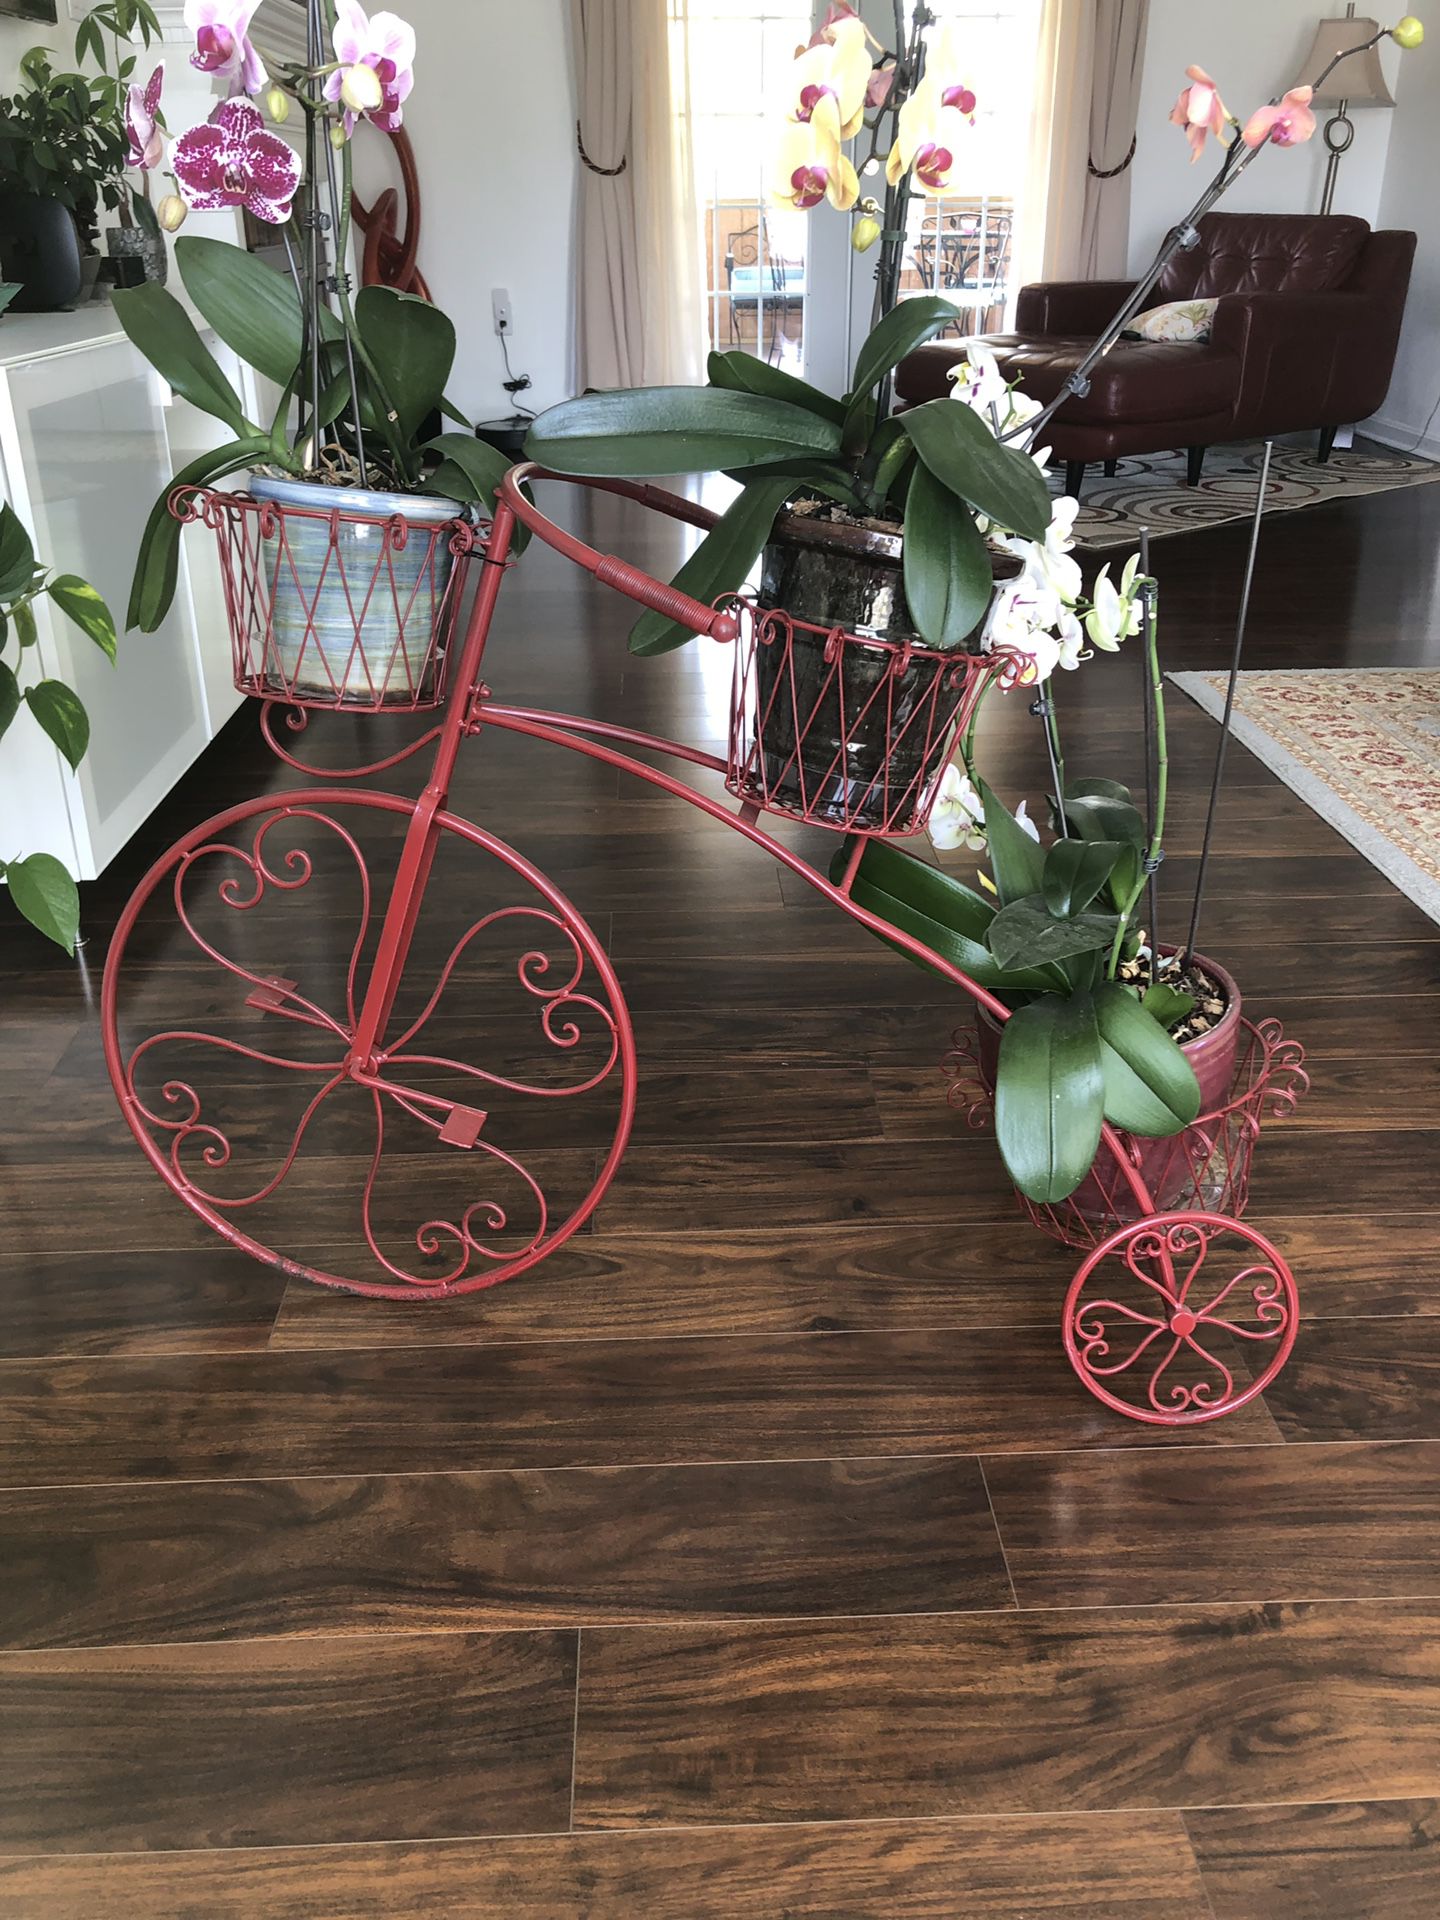 Bicycle stand plant